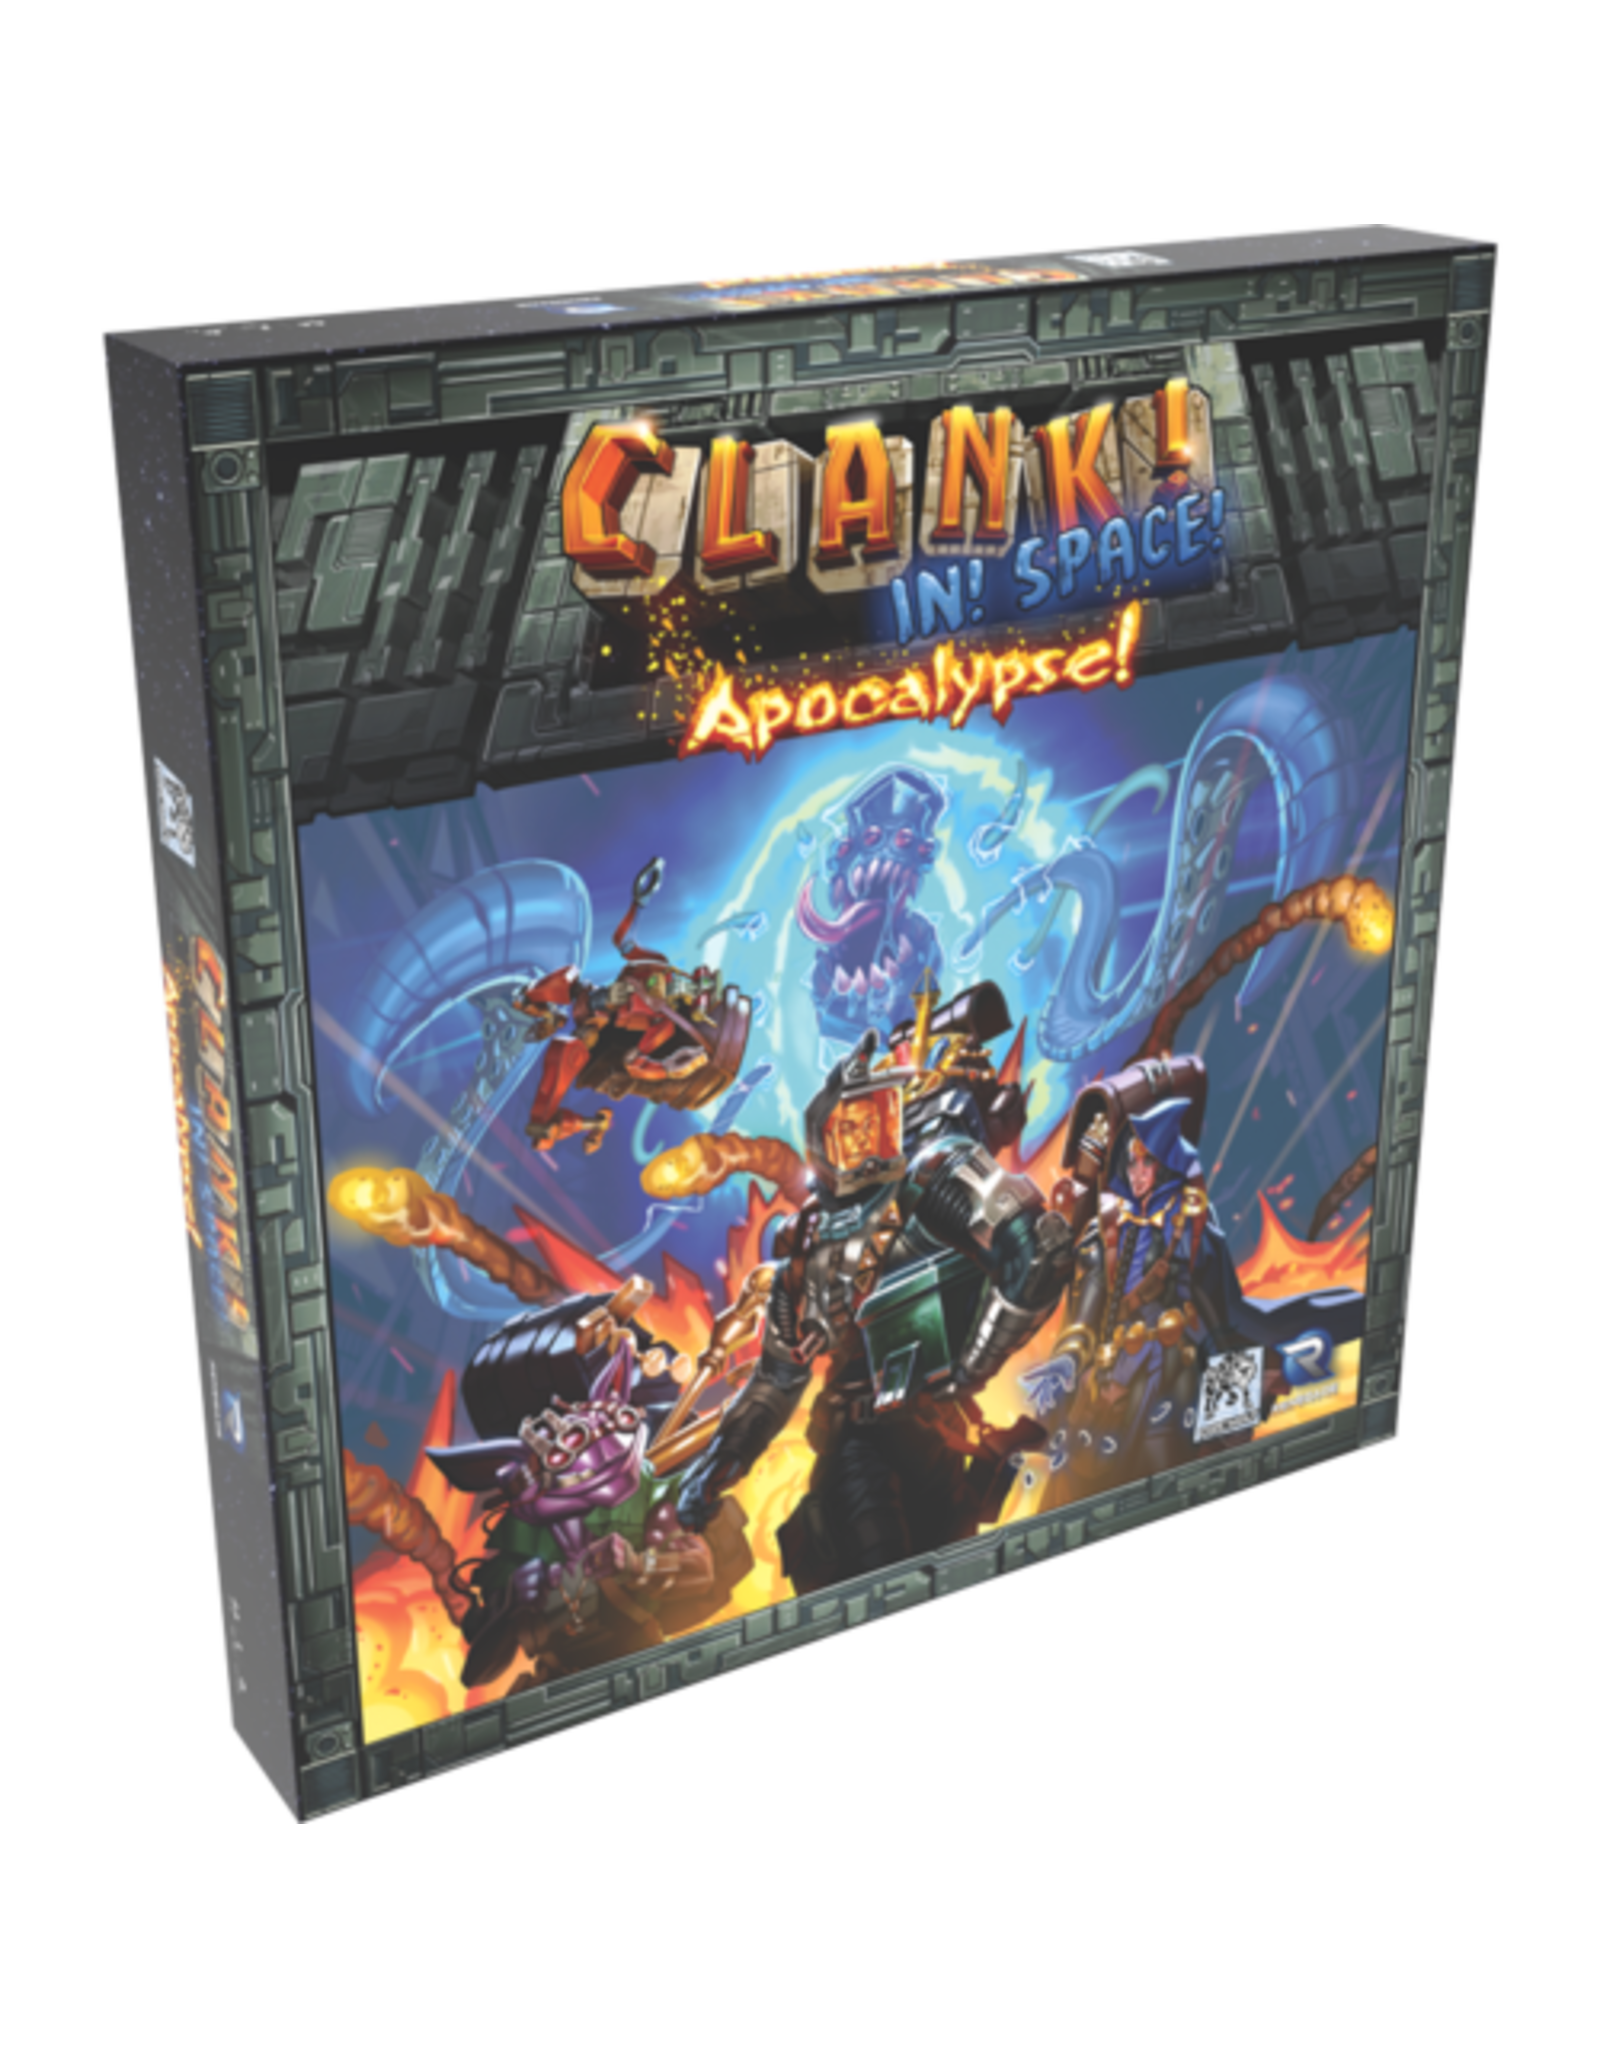 Direwolf Clank In Space!: Apocalypse! Expansion